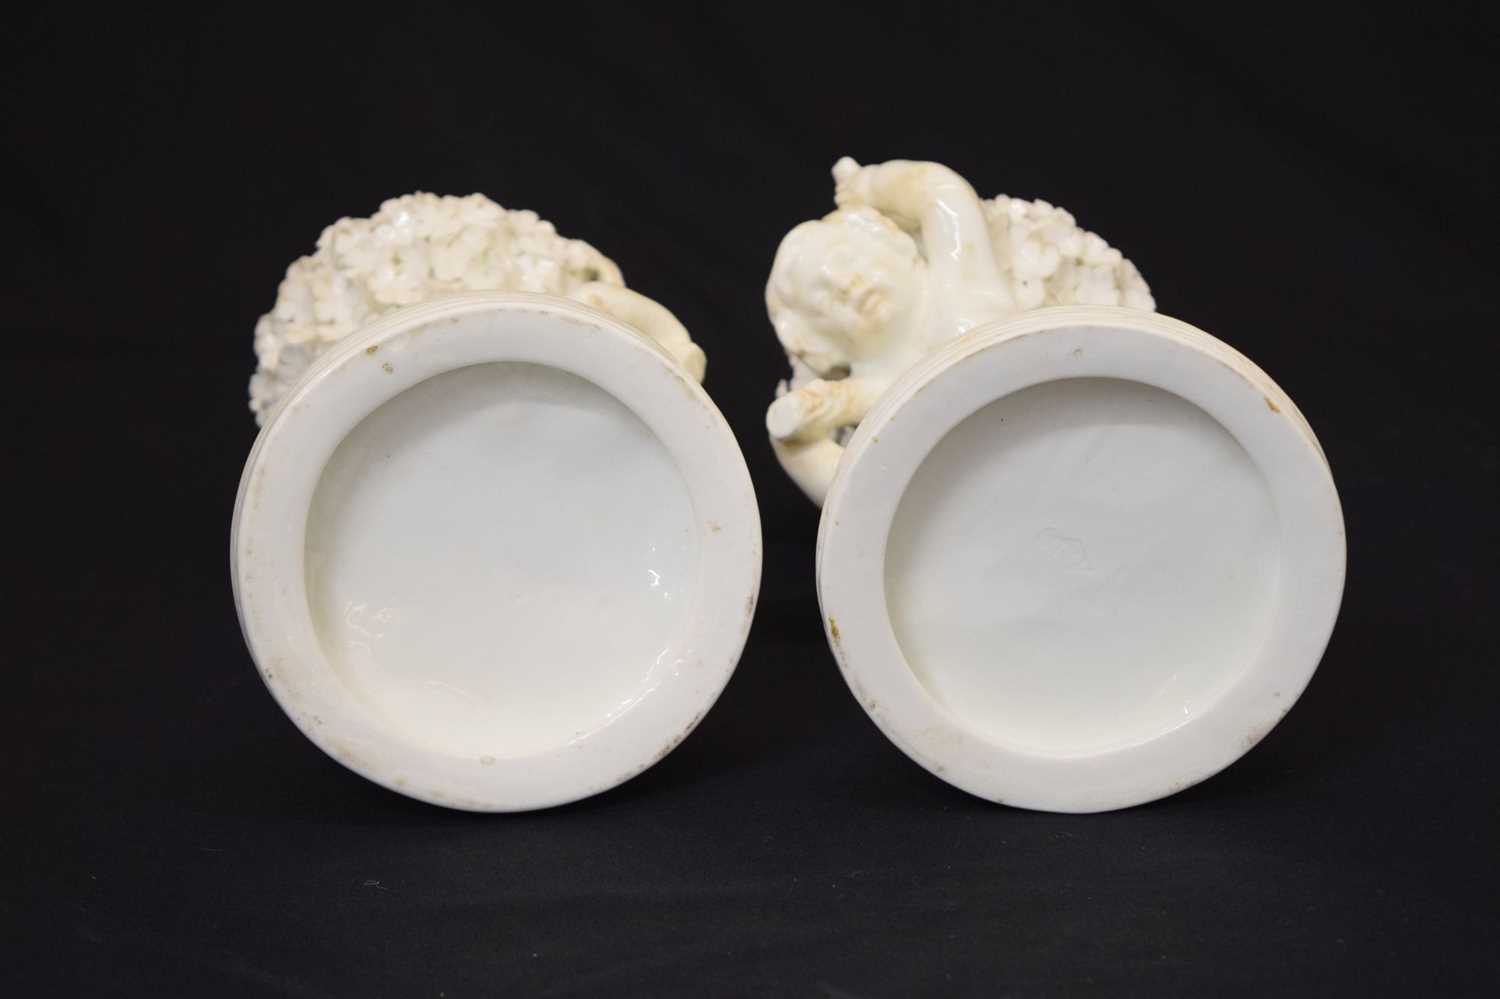 Pair of late 19th century Moore Brothers porcelain figures of cherubs - Image 9 of 9